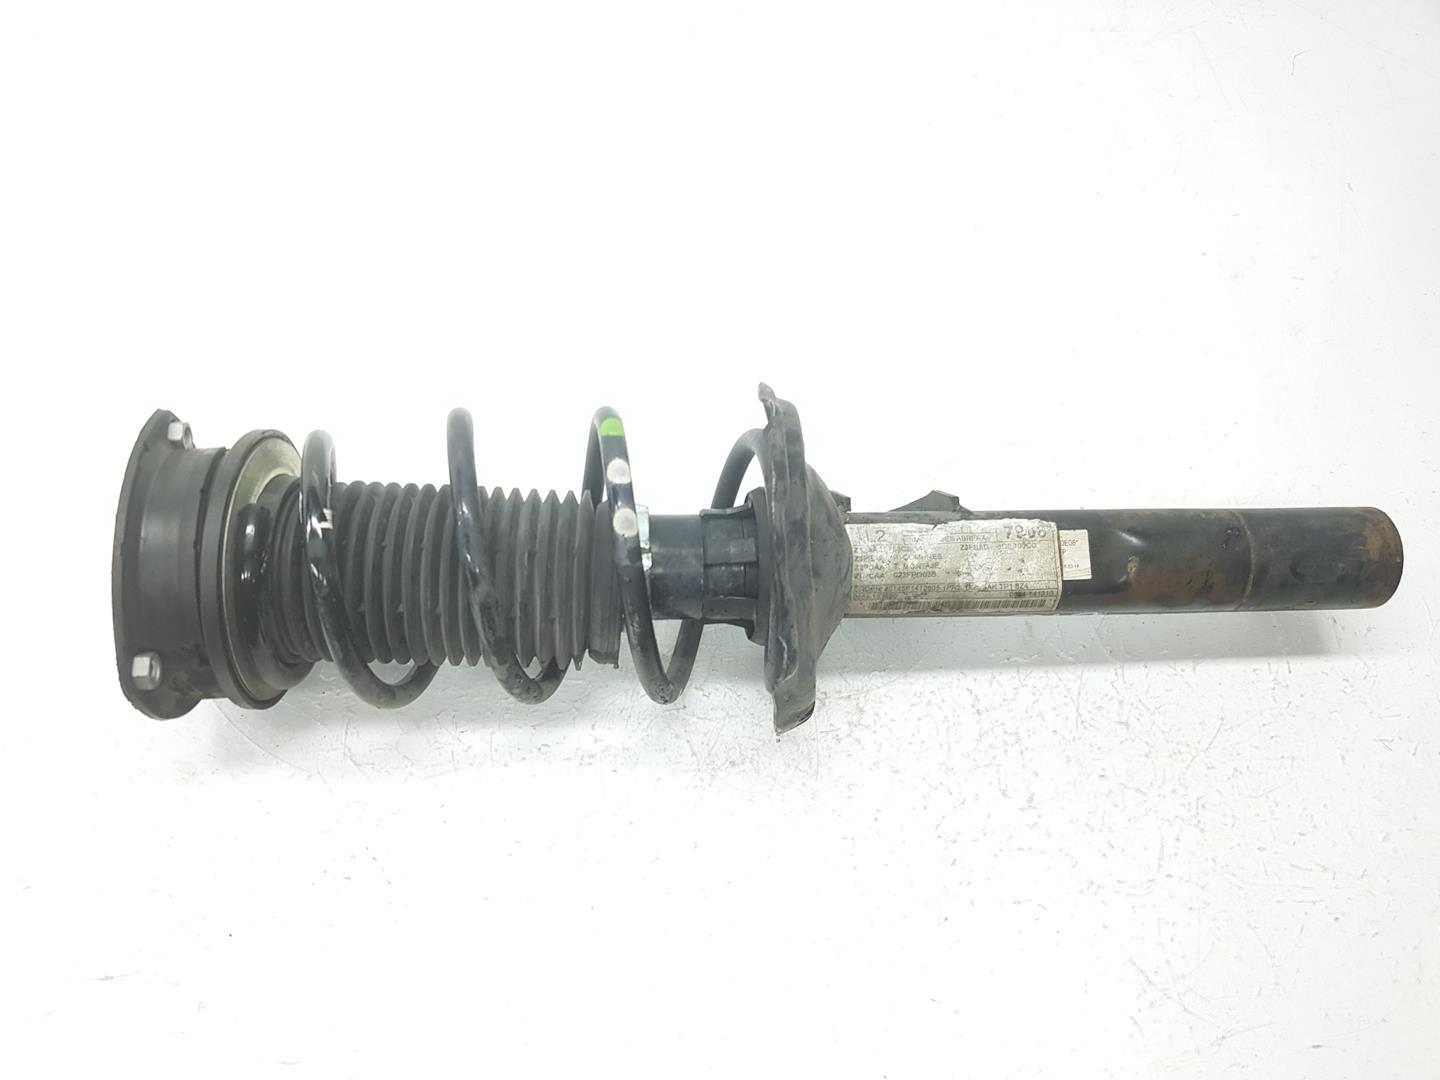 SEAT Leon 3 generation (2012-2020) Front Right Shock Absorber 5Q0413023FP, 5Q0413023FP 19875036